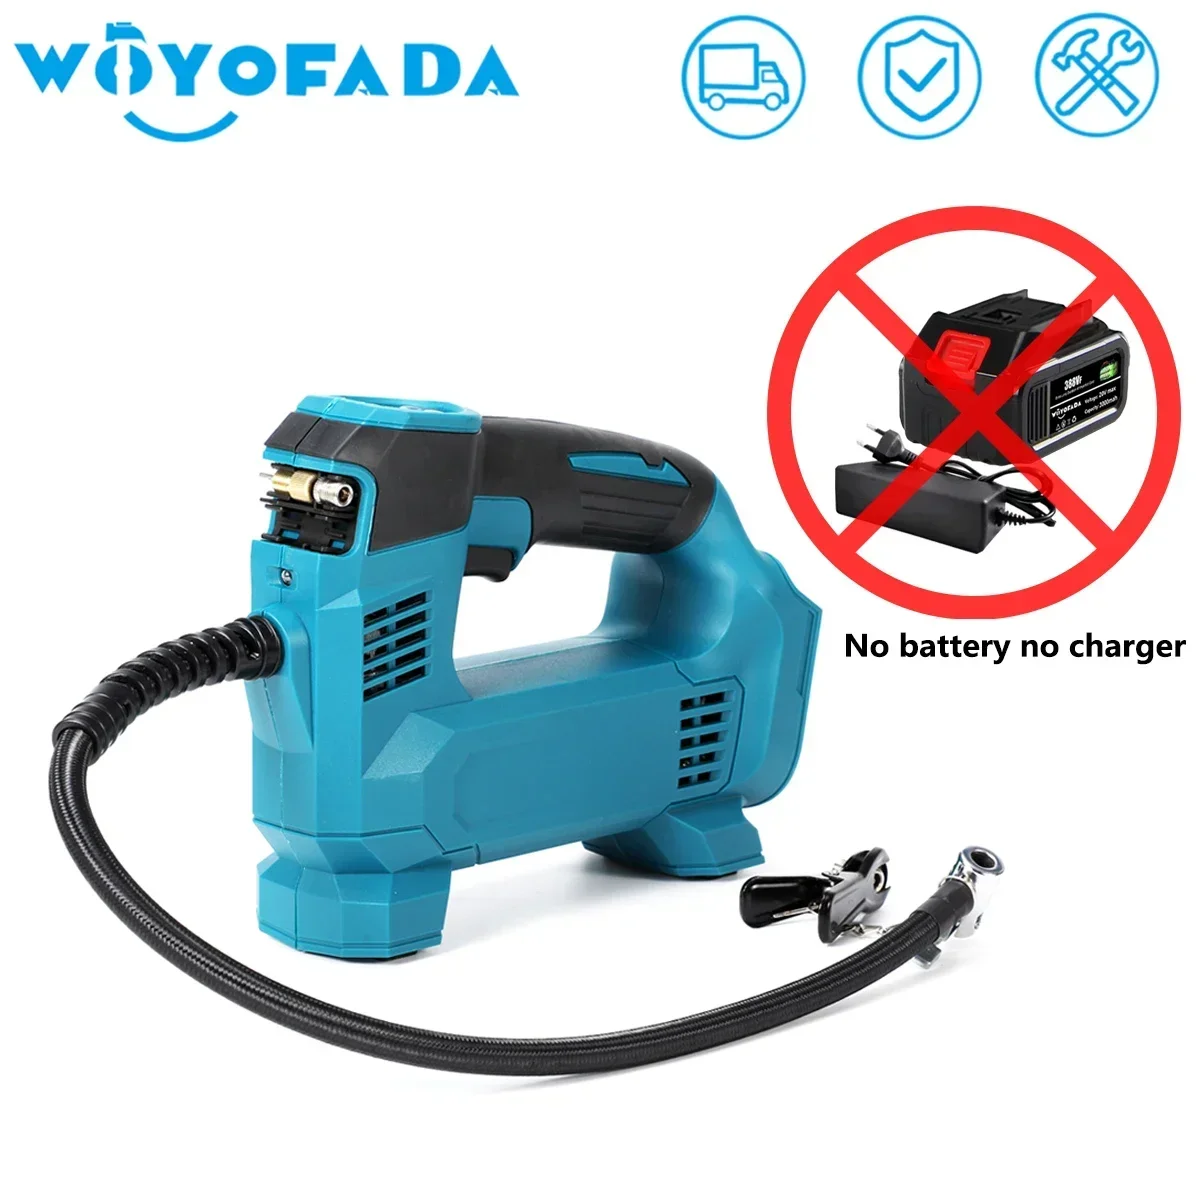 WOYOFADA Cordless Portable Electric Air Pump Car Tire Inflator Air Compressor For Car Bicycle Tires Balls For Makita 18V Battery gogobest gm27 electric bike 27 5 3 0 inch fat tires 48v 350w mid motor 25km h max speed 10ah battery 50km max range dual hydraulic disc brake blue